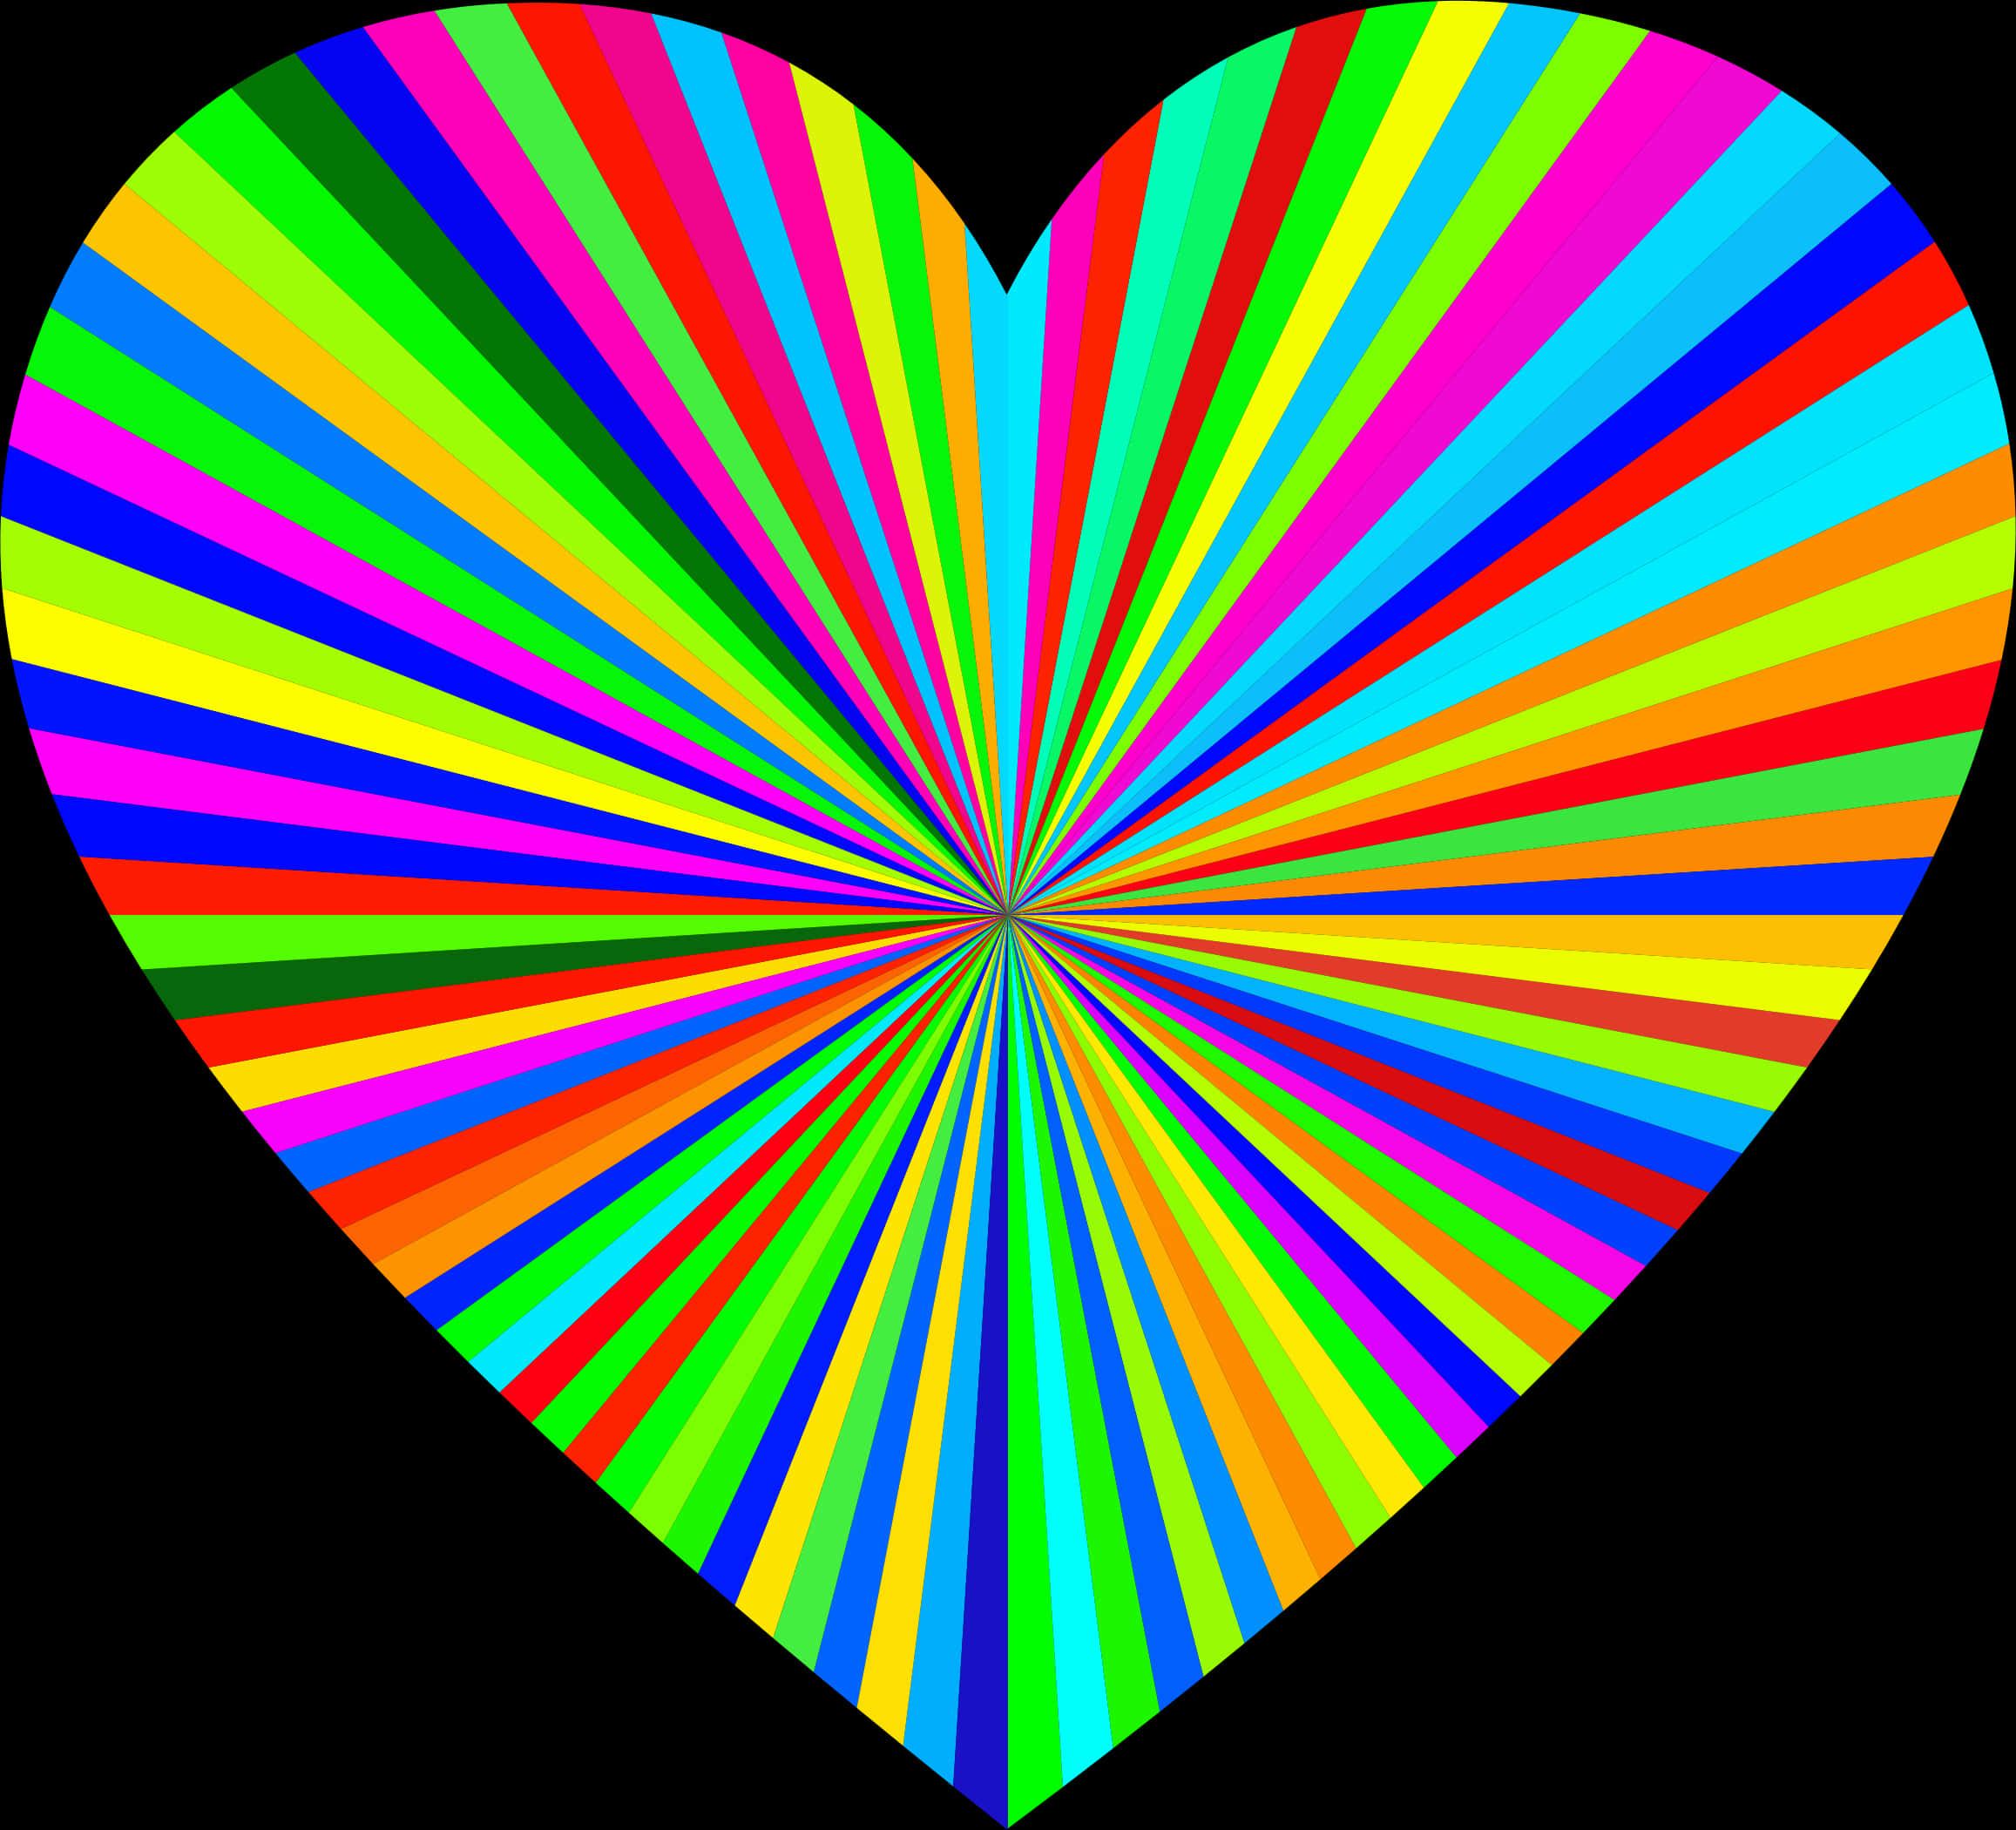 Colorful Heart Starburst Pattern PNG image